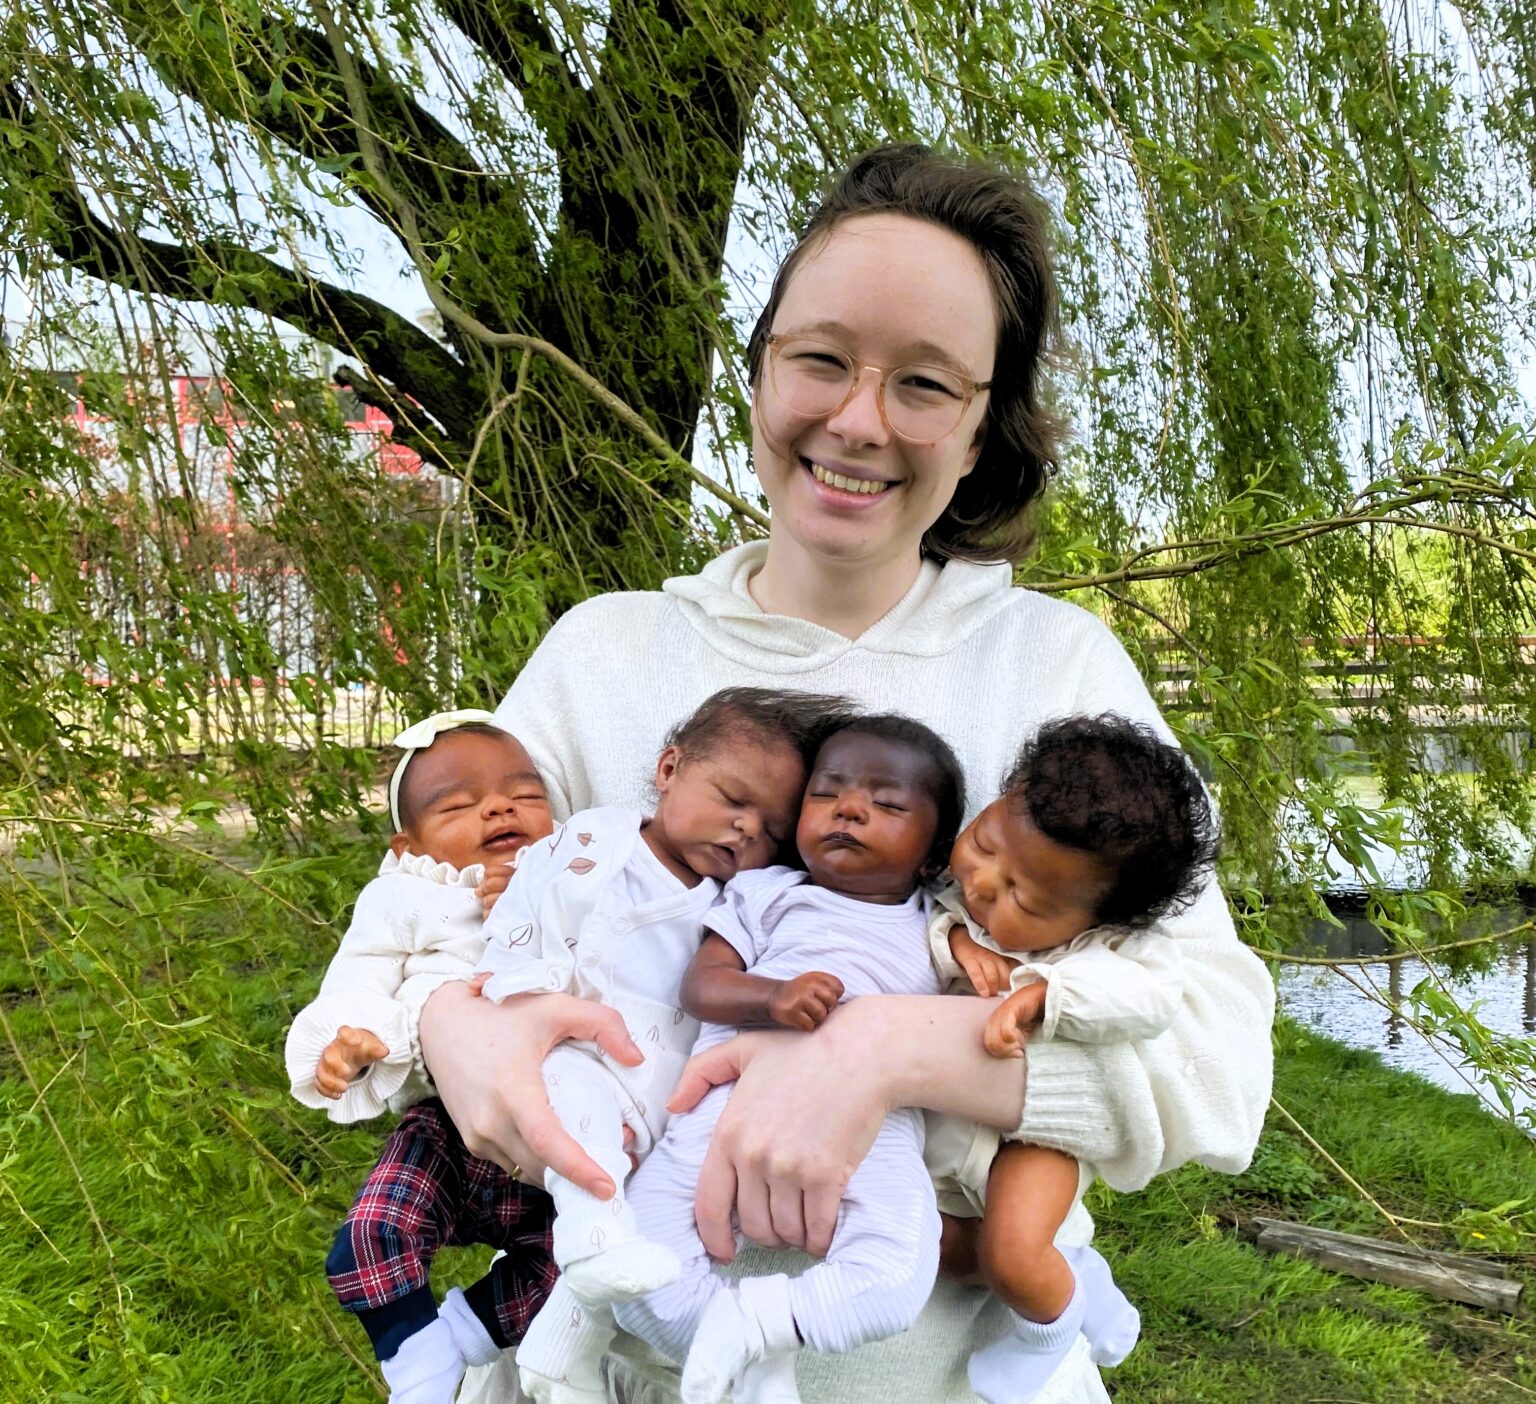 Margriet Shein creates lifelike reborn dolls after losing two pregnancies, facing online trolls but helping others with anxiety and dementia through her intricate, realistic art.